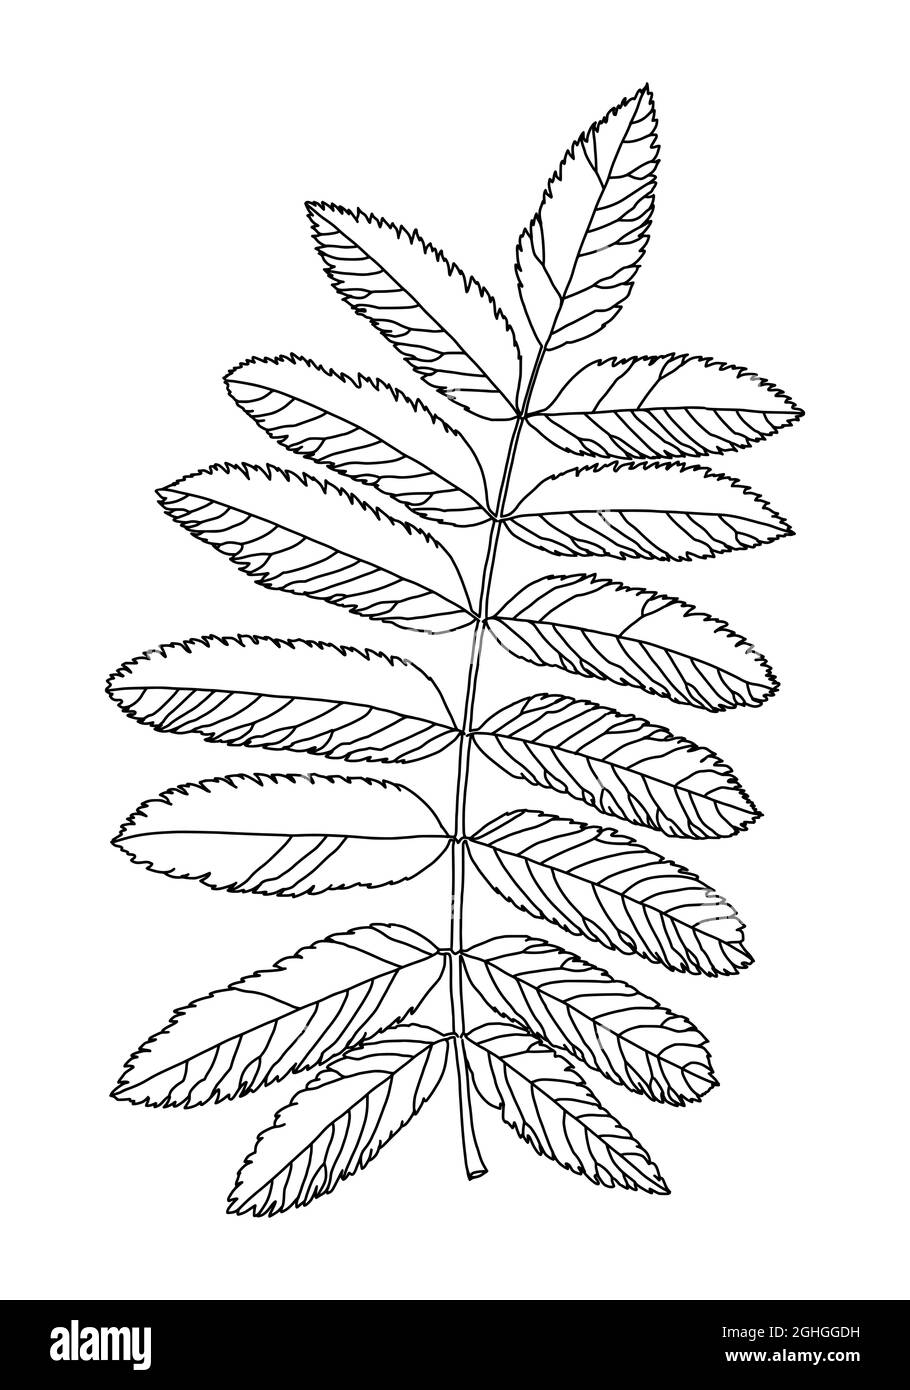 Linear graphic picture rowan leaves with veins isolated on a white background. Vector illustration. Element for design in line art style. Stock Vector